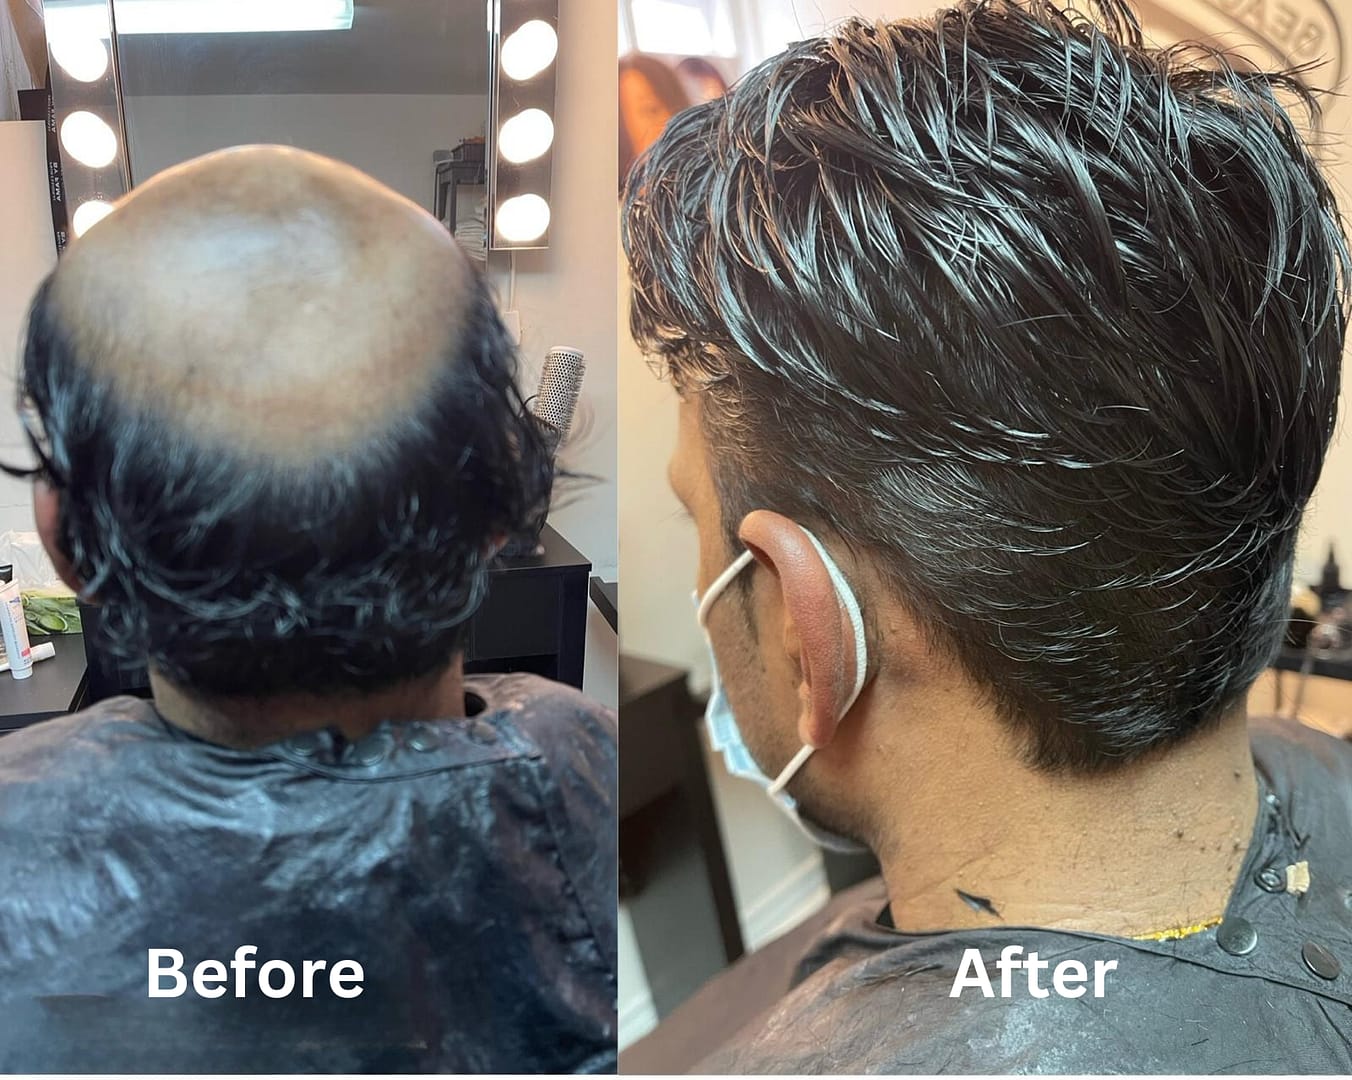 Non surgical hair replacment Beforeand after